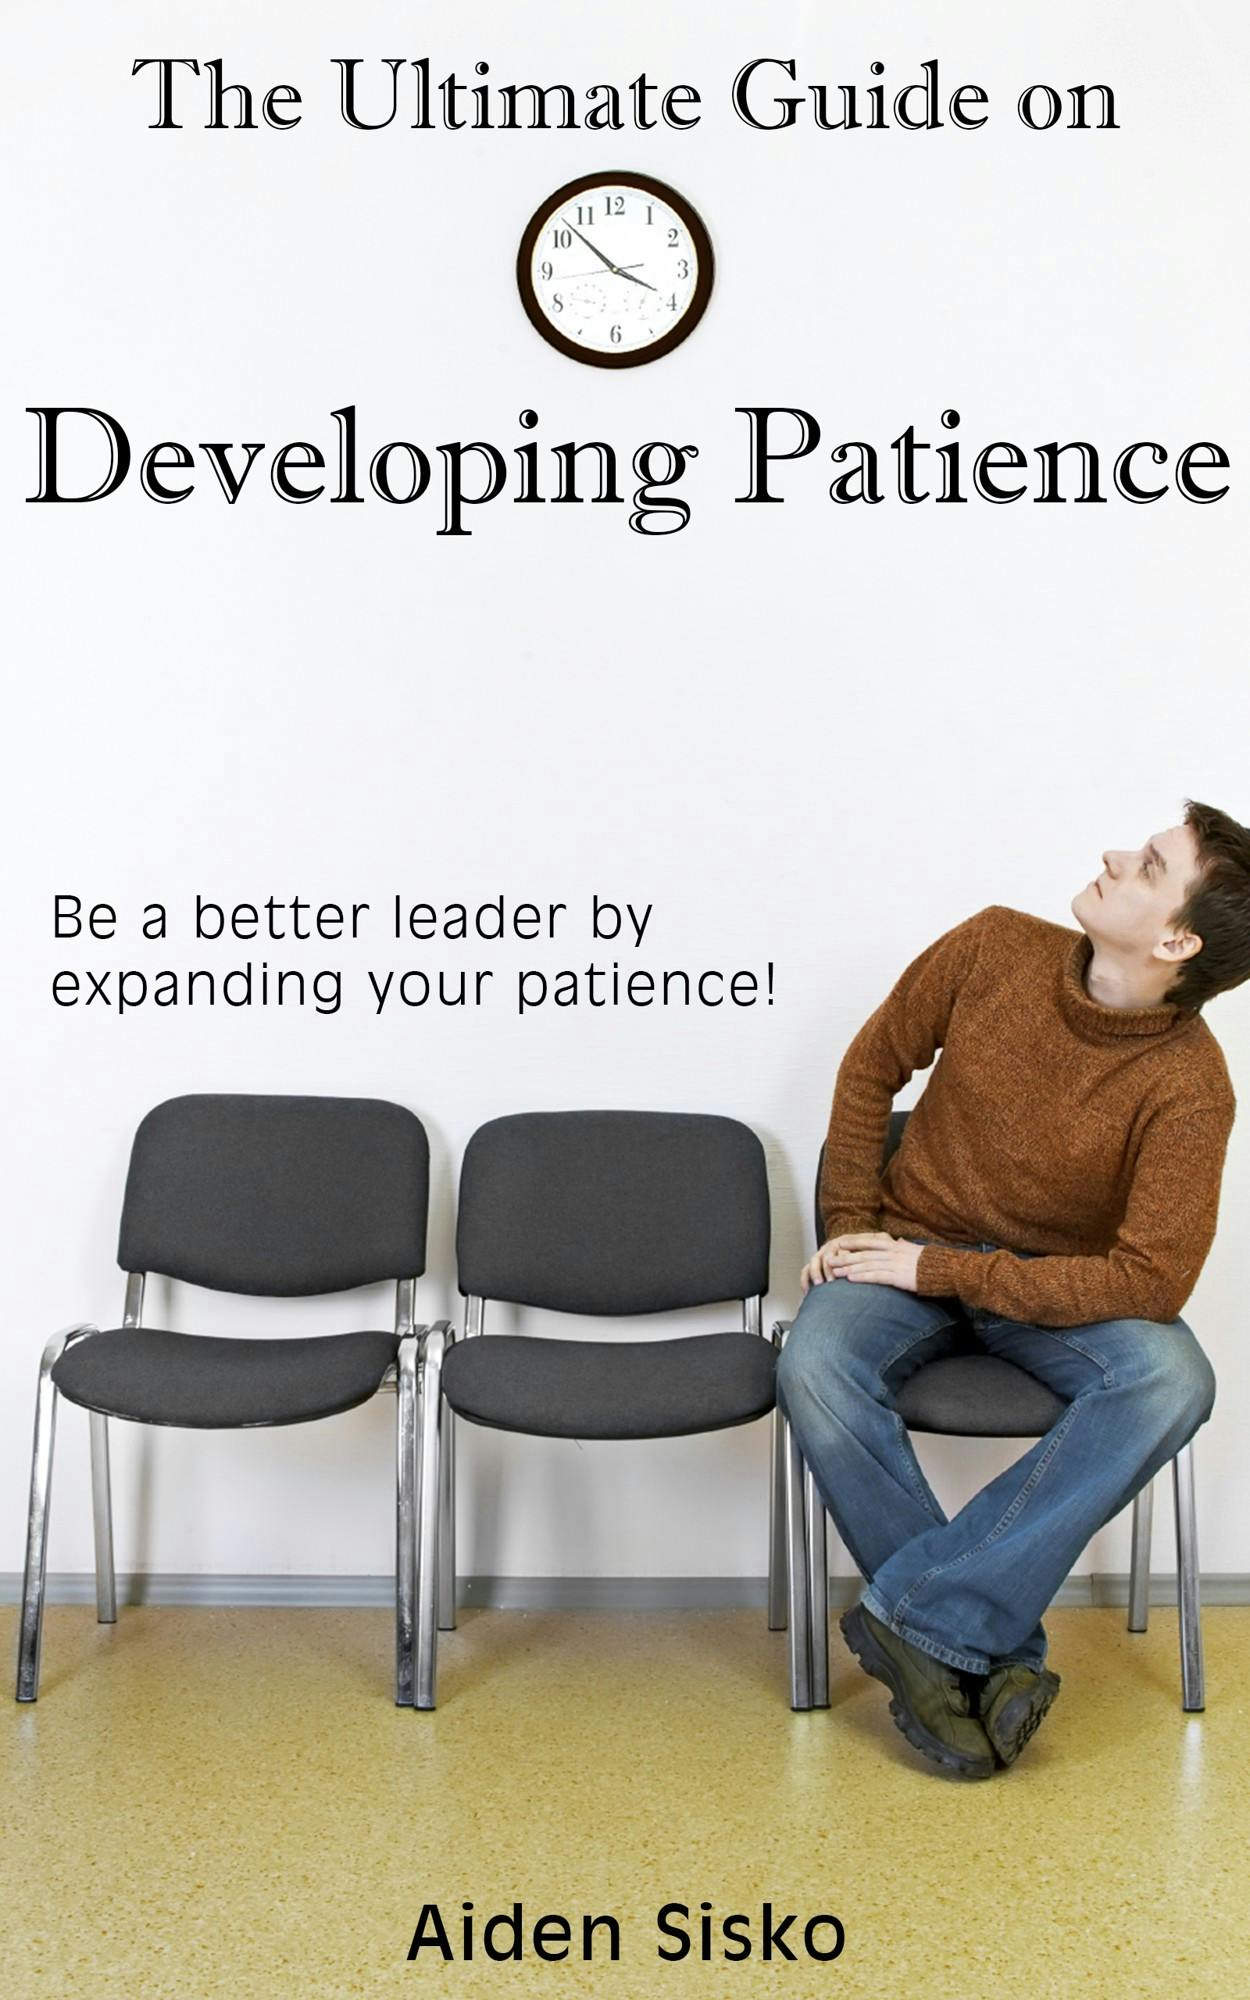 The Ultimate Guide on Developing Patience - Aiden Sisko